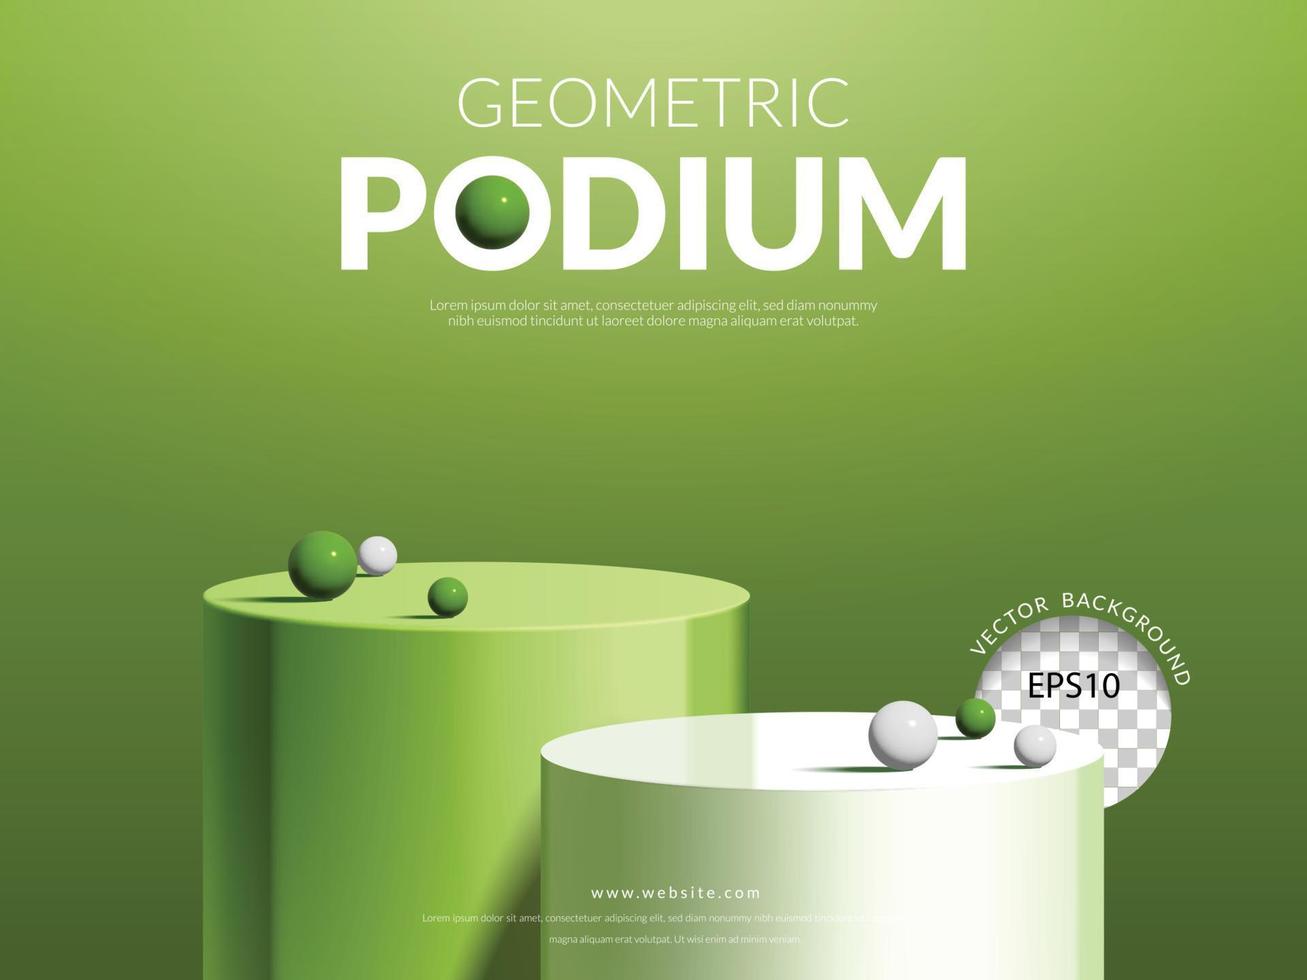 Geometric product display concept, green and white podium with ball on green background, vector illustration